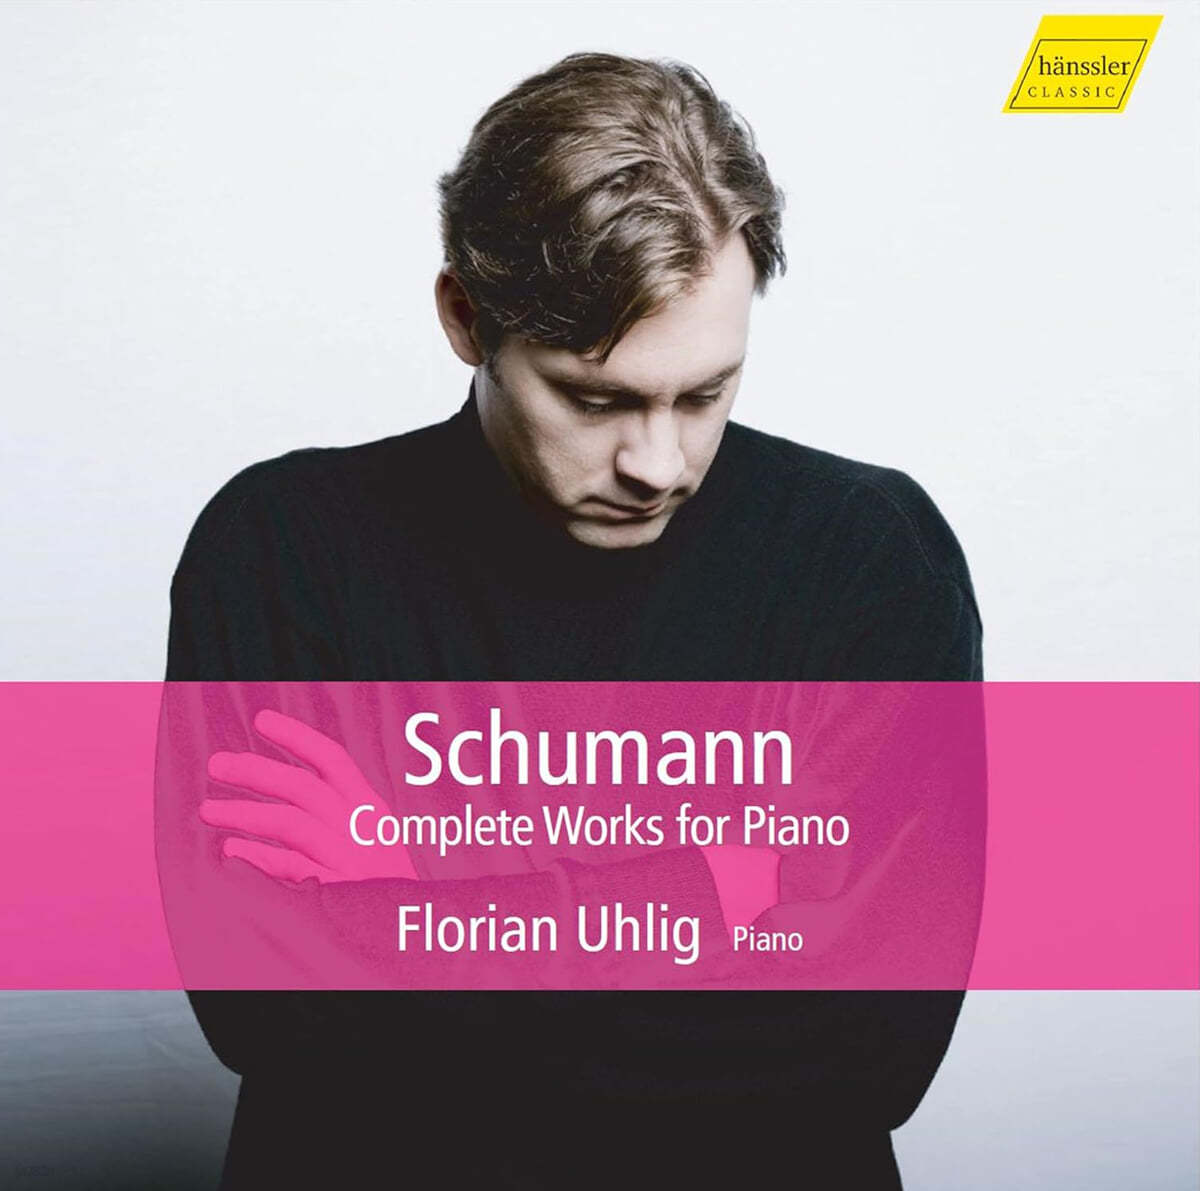 Florian Uhlig 슈만: 피아노 작품 전집 (Schumann: Complete Works for Piano) 